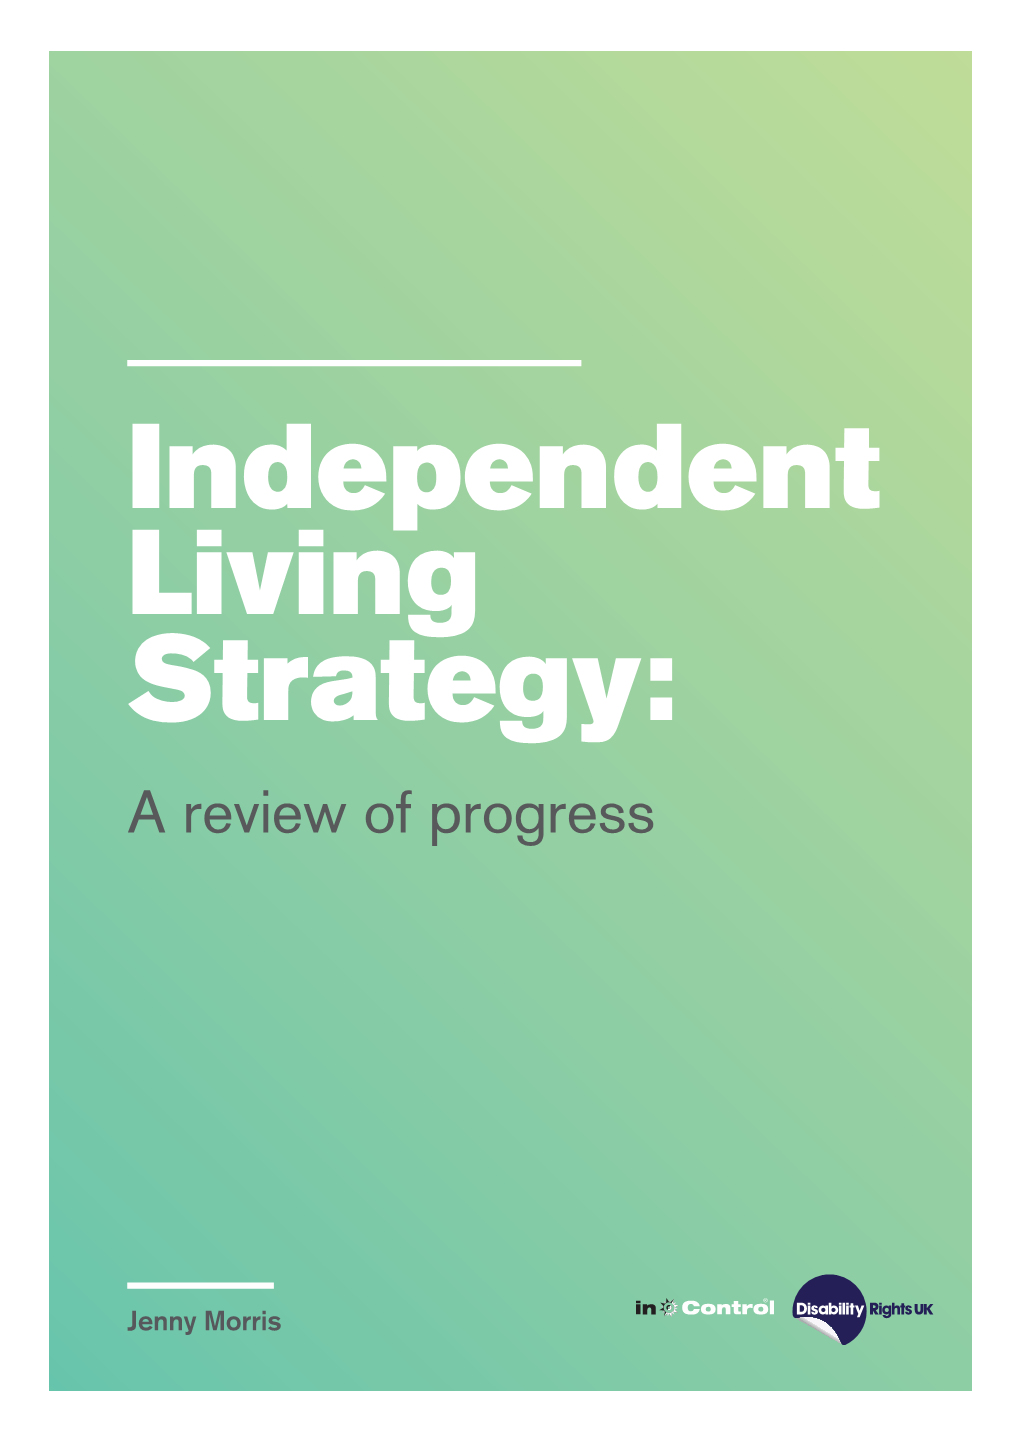 Independent Living Strategy: Review of Progress